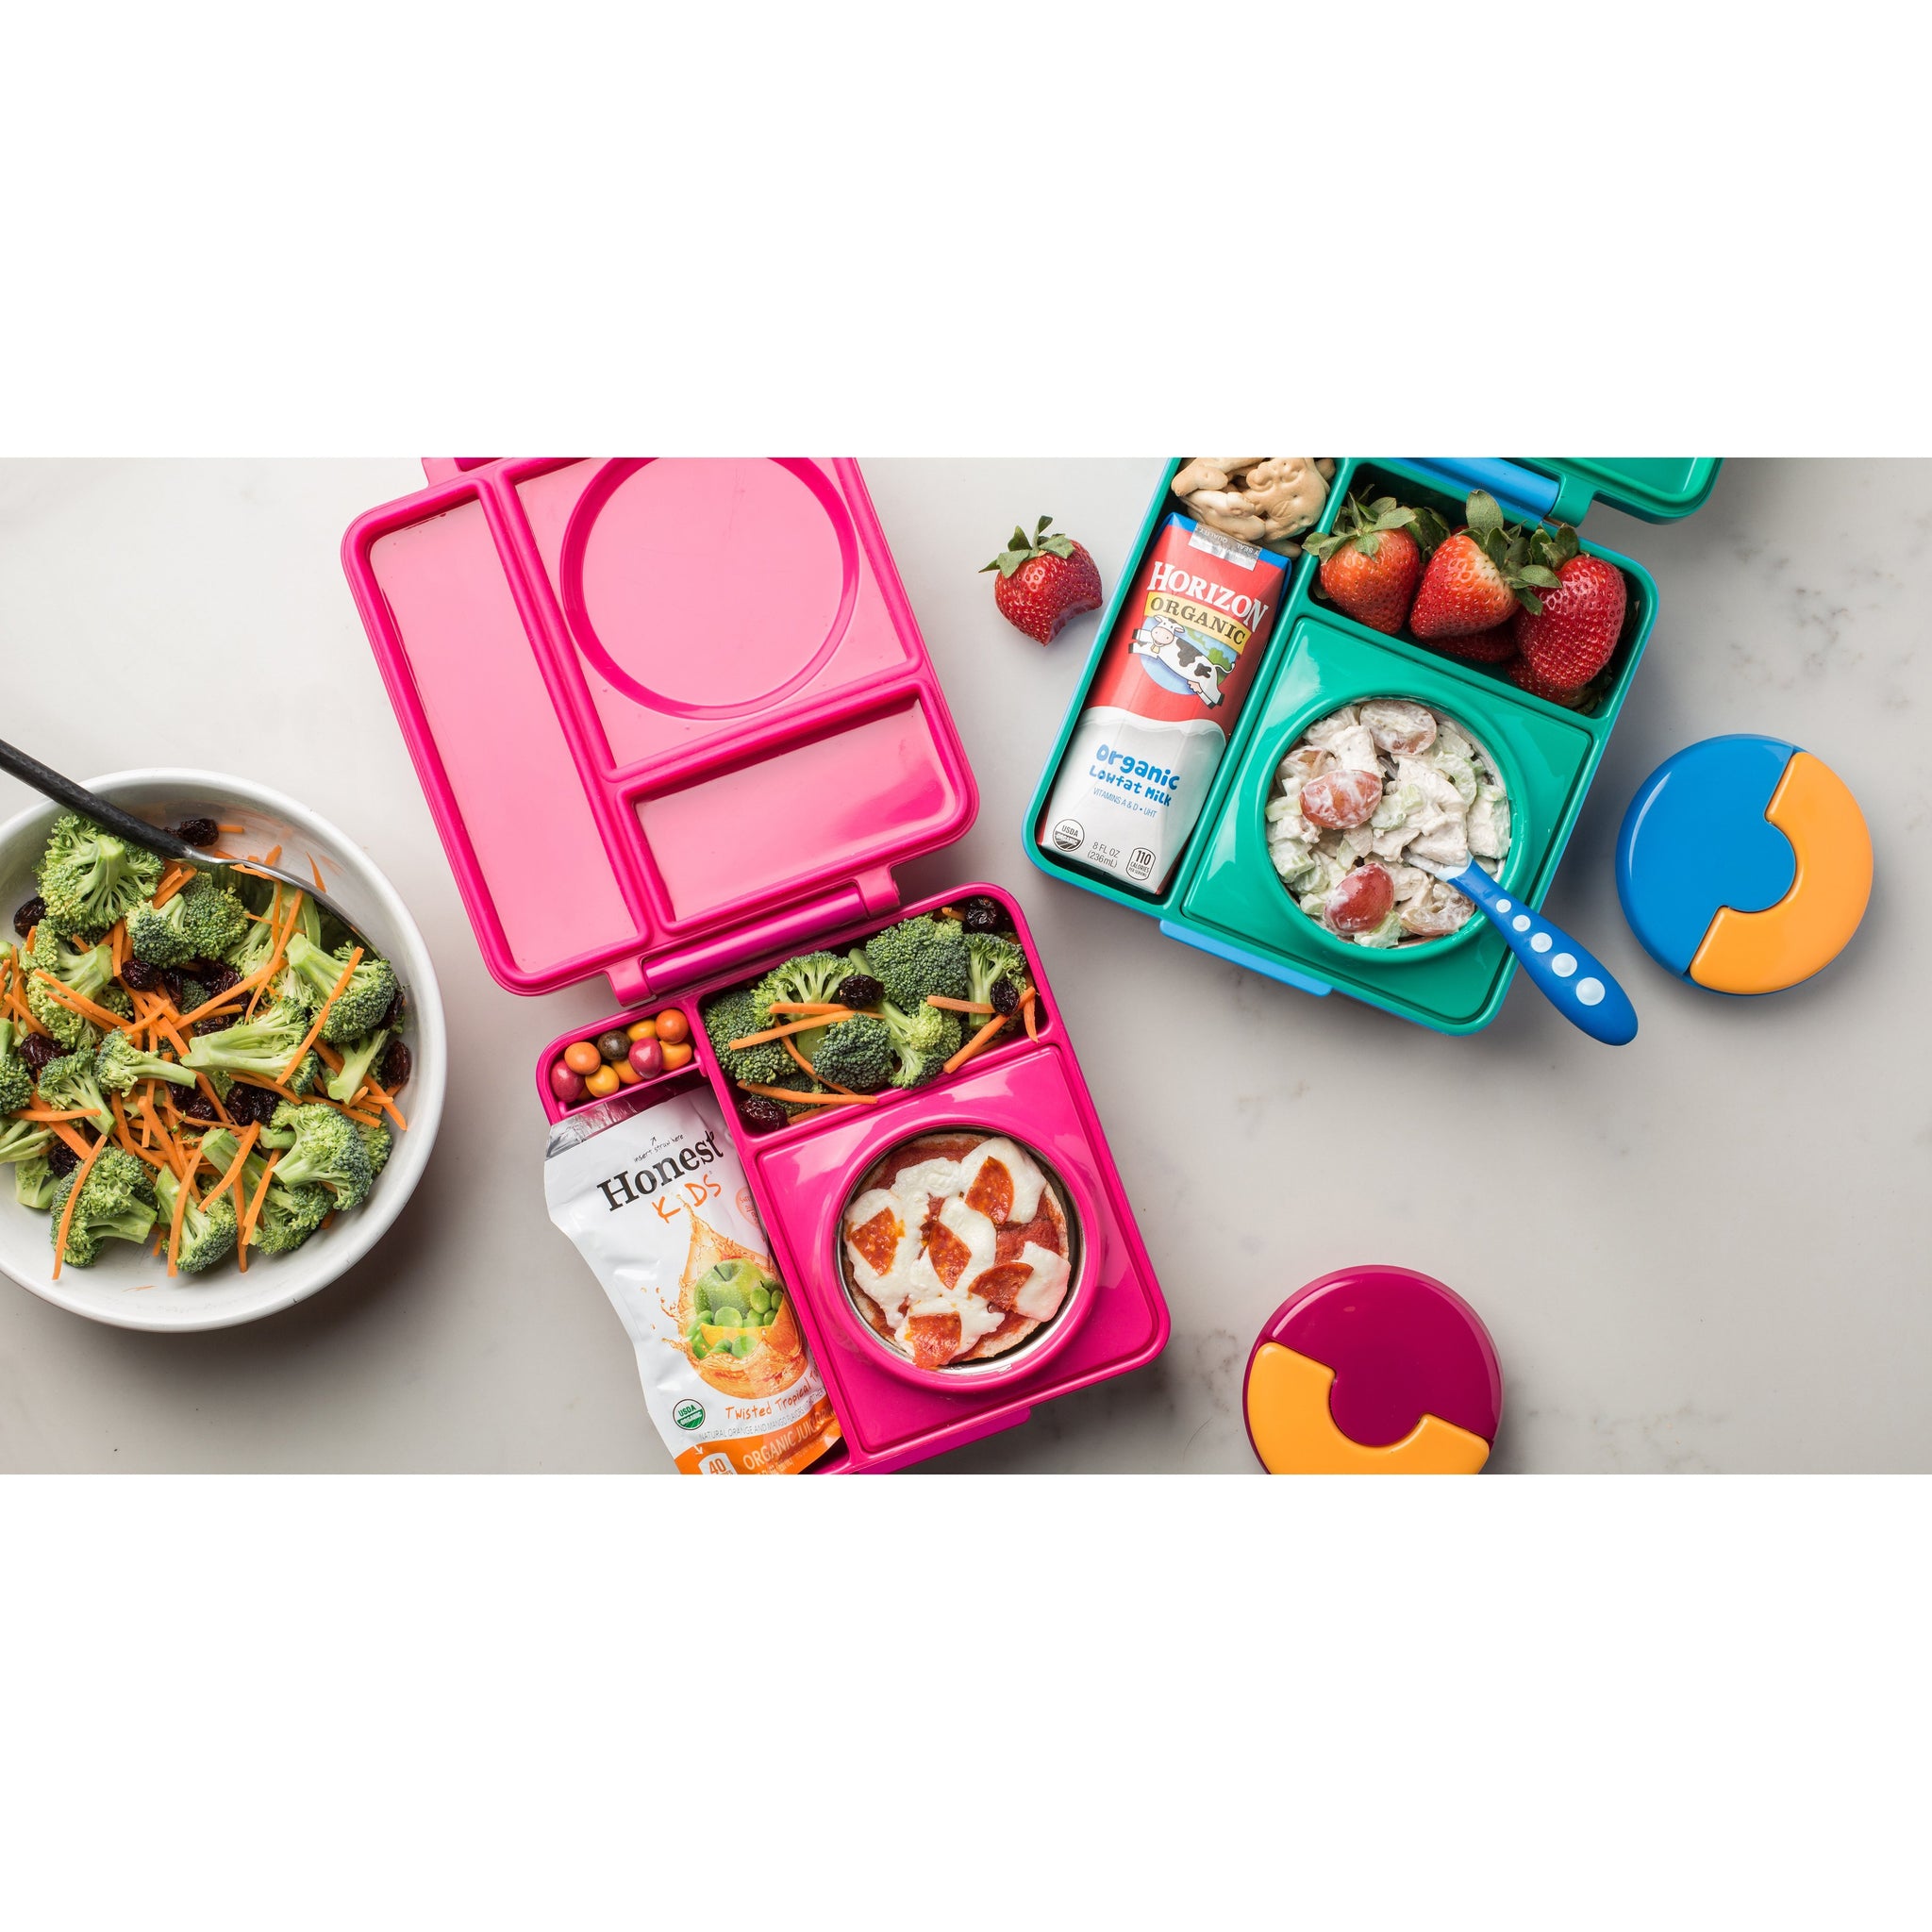 Buy OmieBox Hot & Cold Bento Lunch Box V2 - Pink Berry – Biome US